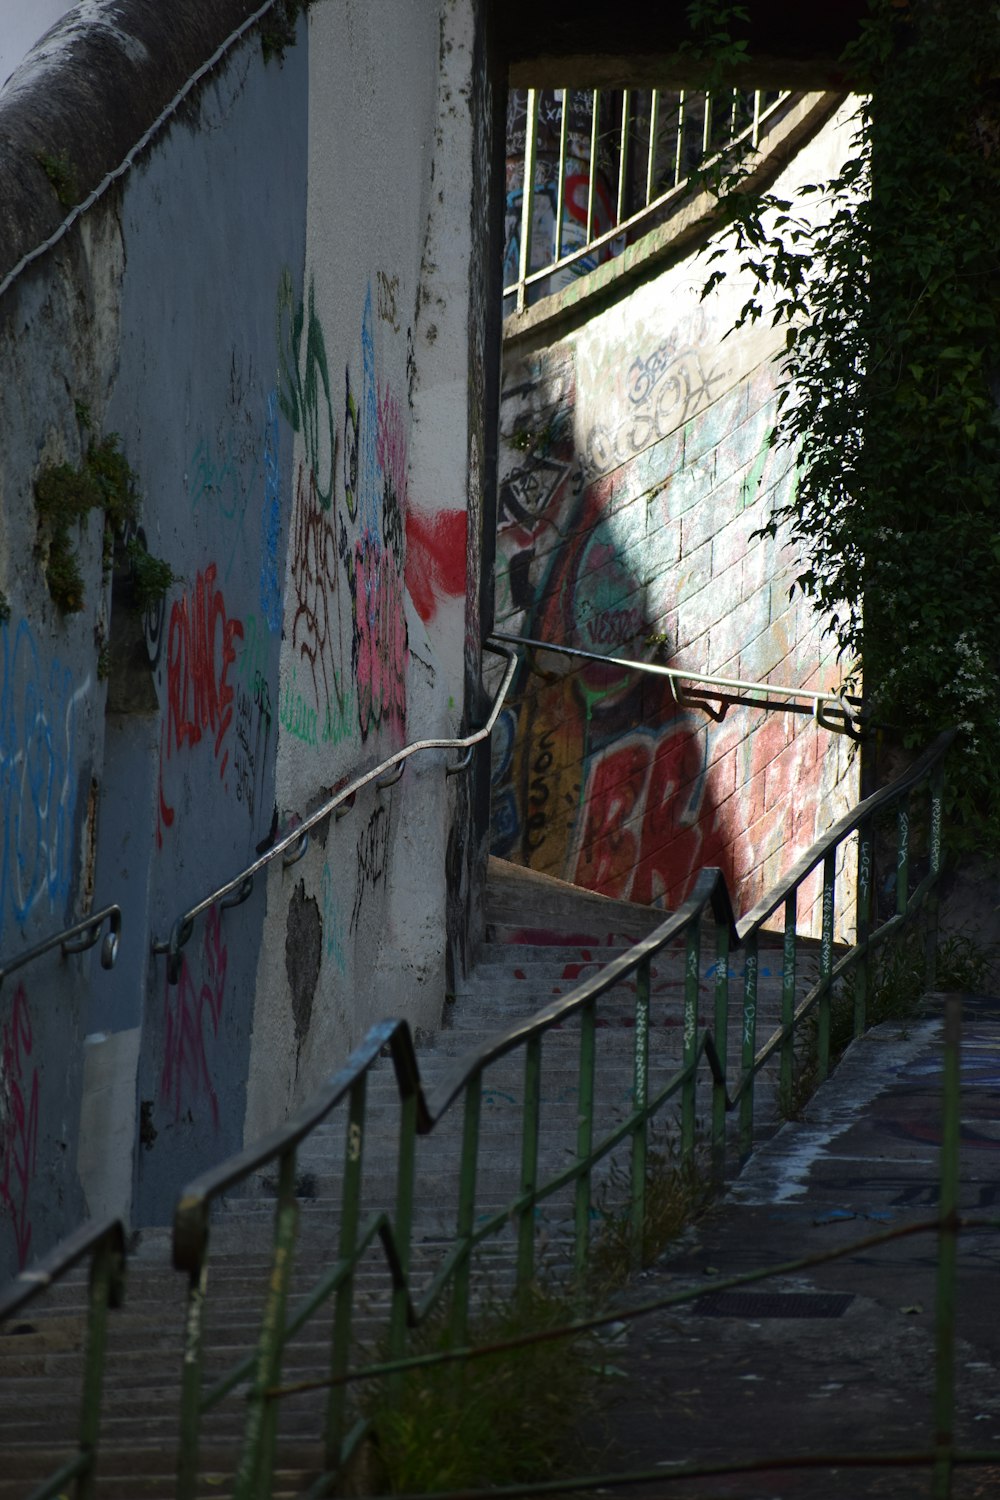 a stairway with graffiti on it